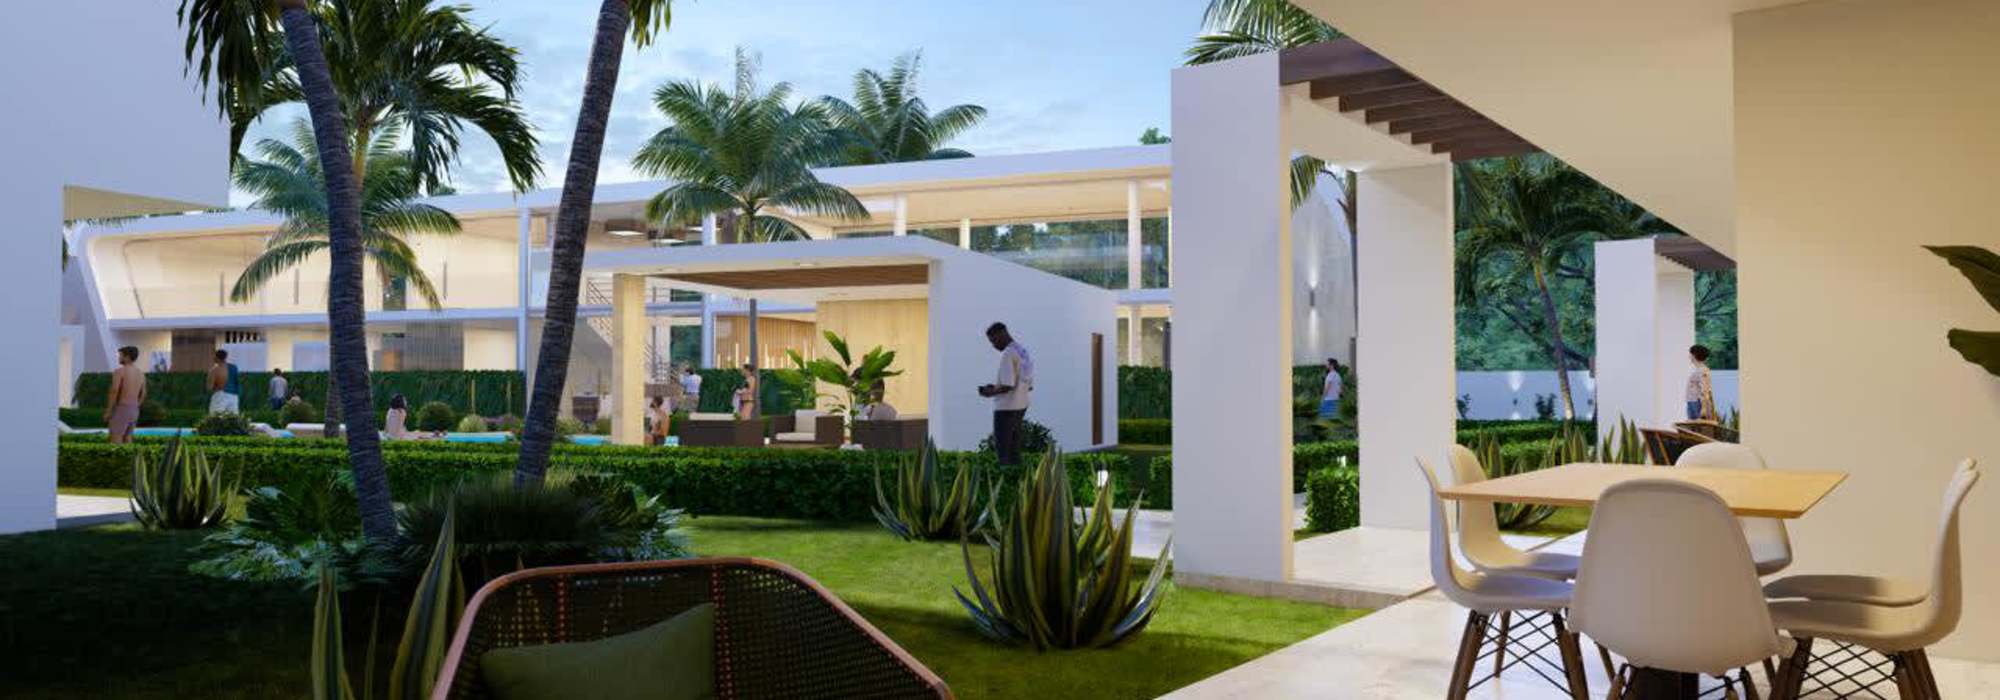 Apart Hotel style apartment project in Las Terrenas, Samaná